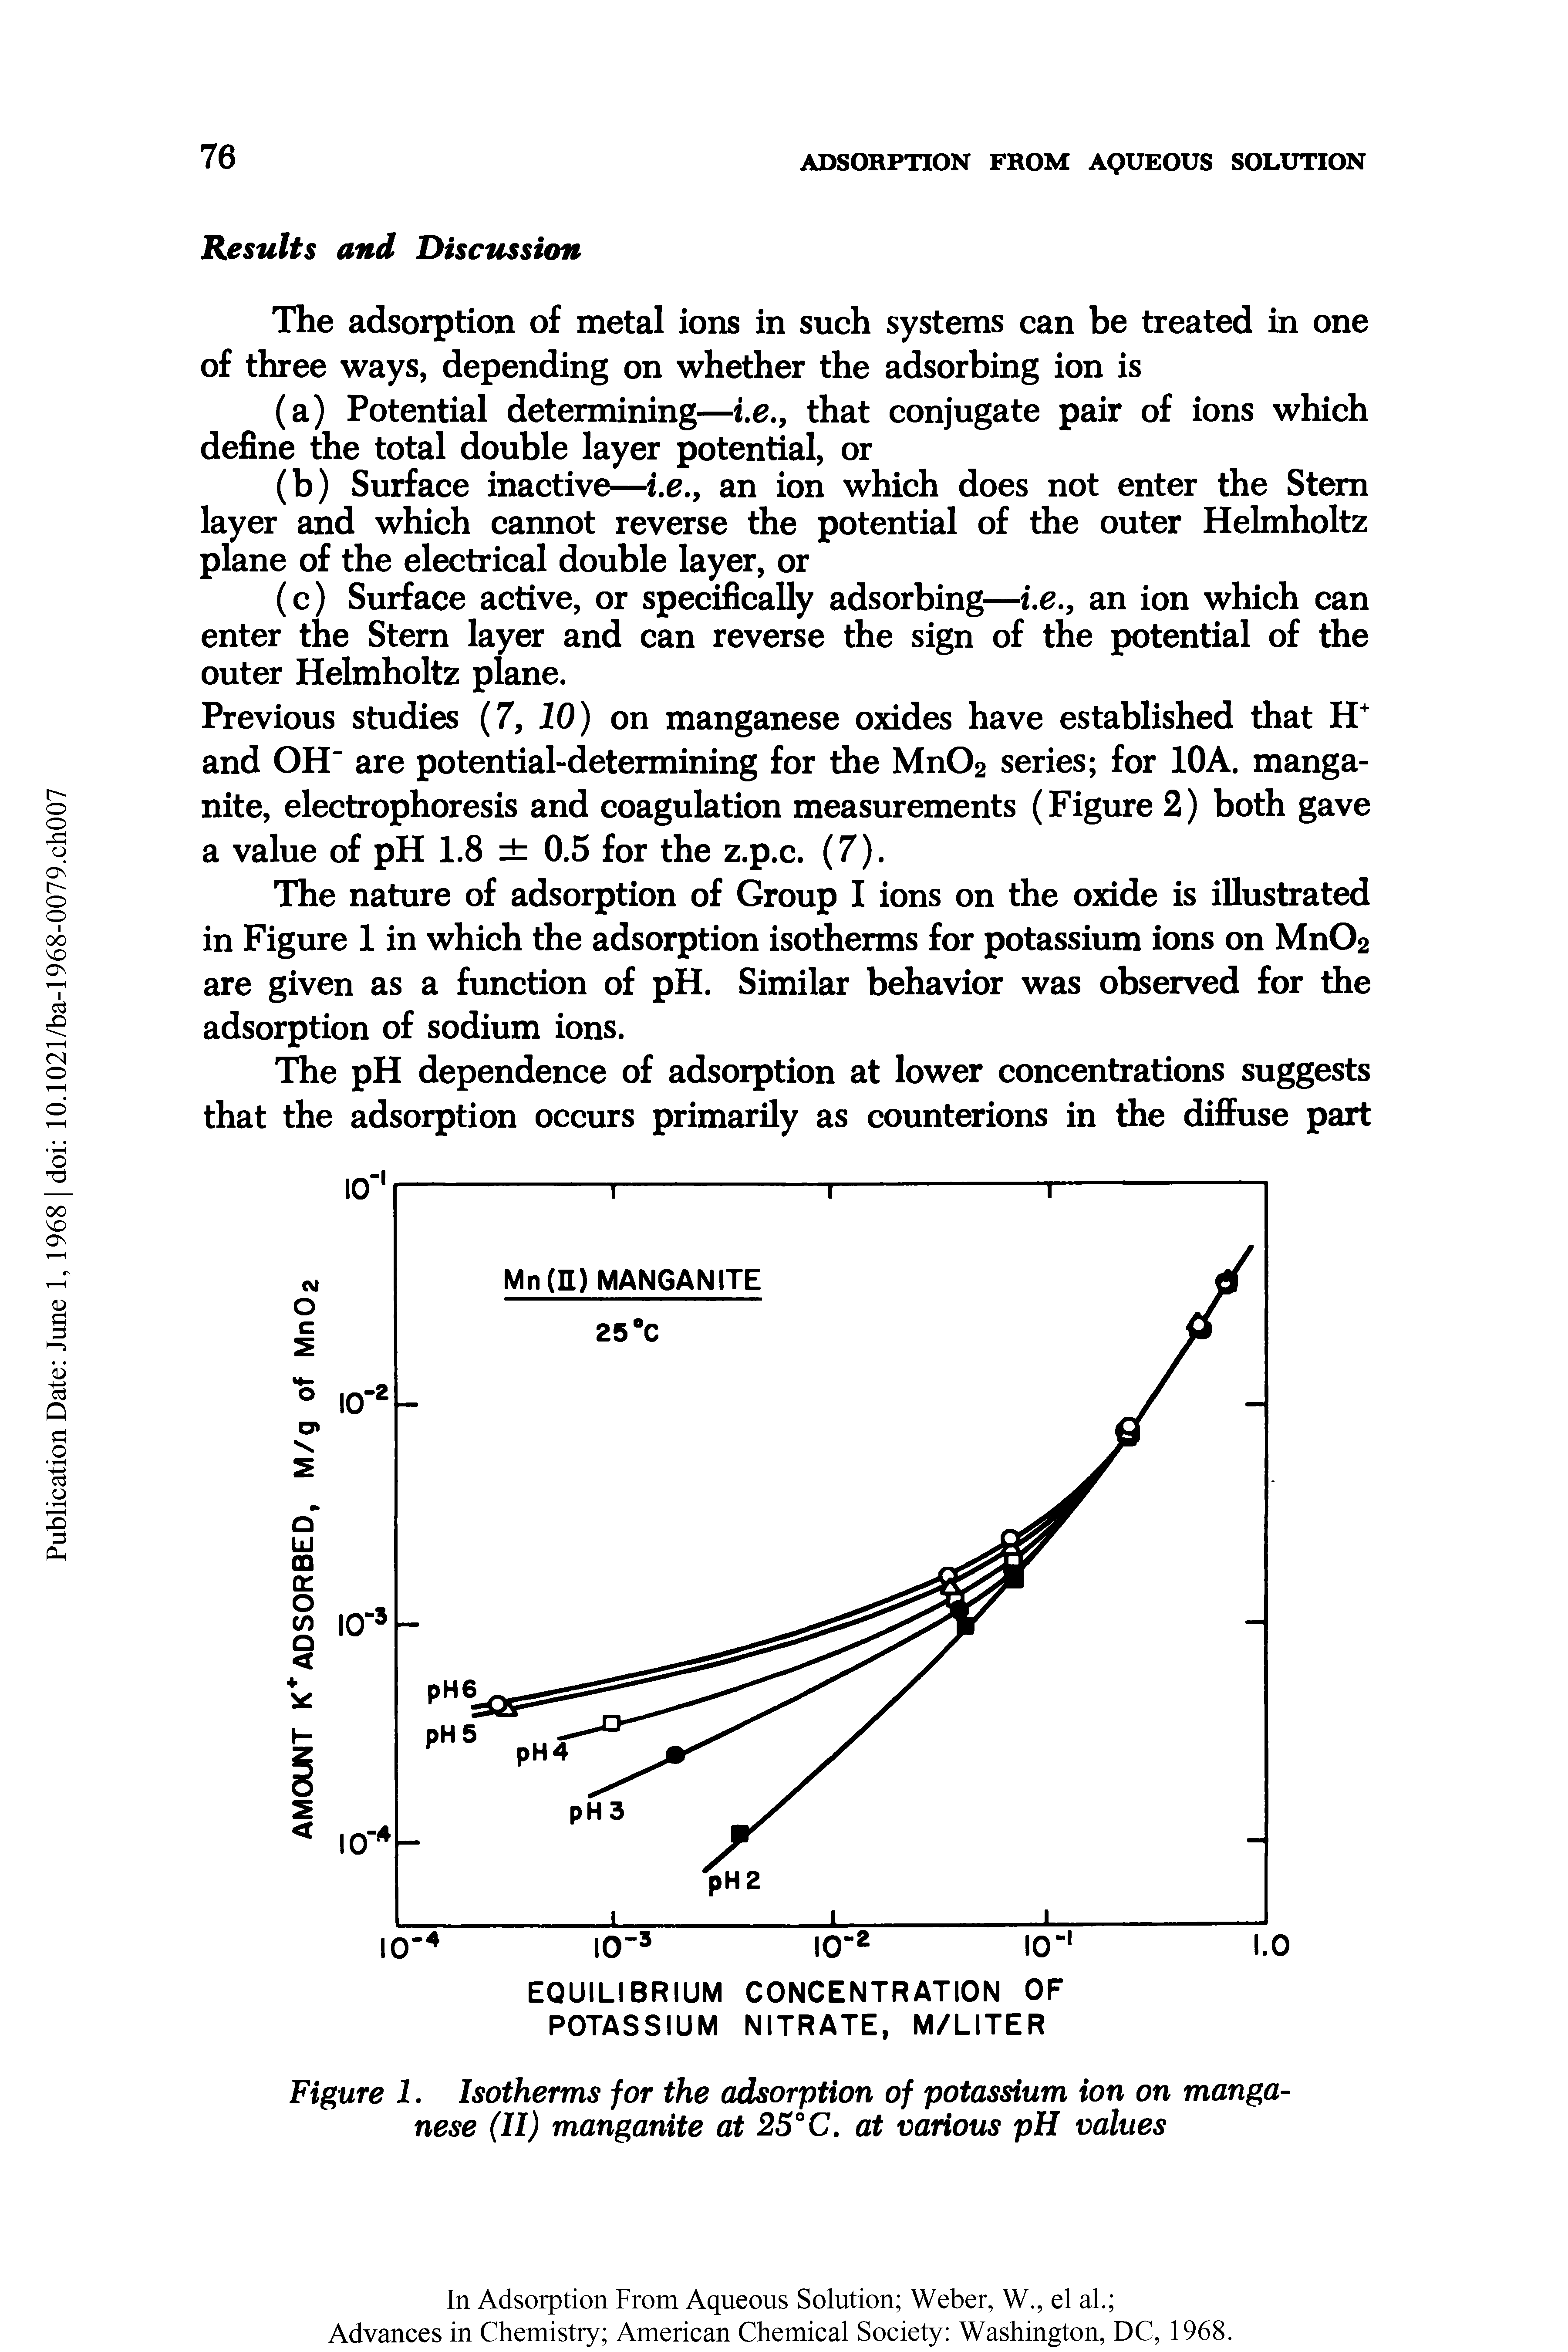 Figure 1. Isotherms for the adsorption of potassium ion on manganese (II) manganite at 25°C. at various pH values...